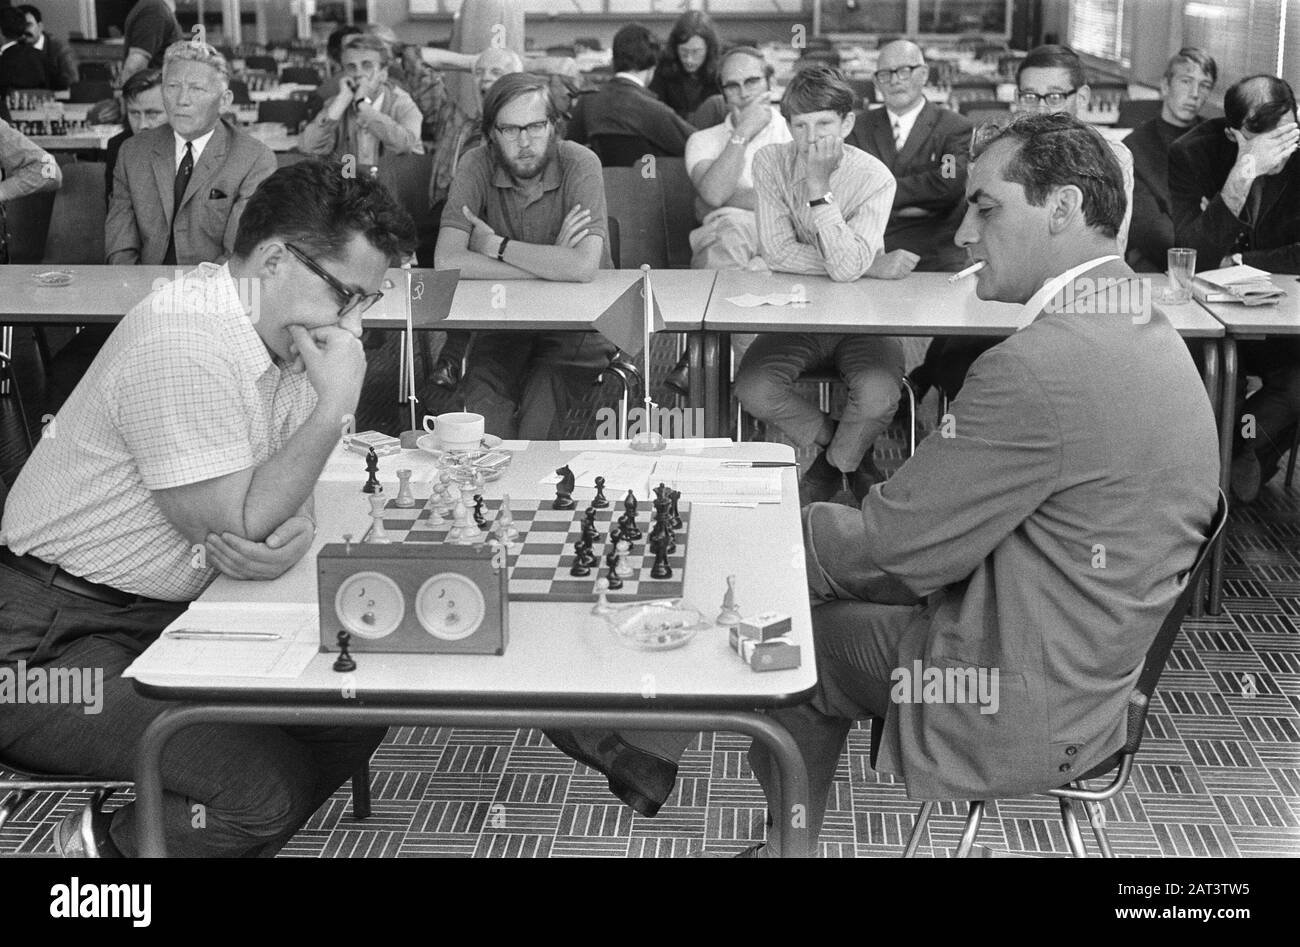 IBM chess tournament at the RAI in Amsterdam IBM chess tournament 1969. ,  right: Leonid Stein (smoking) Date: 21 July 1969 Location: Amsterdam,  Noord-Holland Keywords: chess, tournaments Institution name: IBM Chess  Tournament